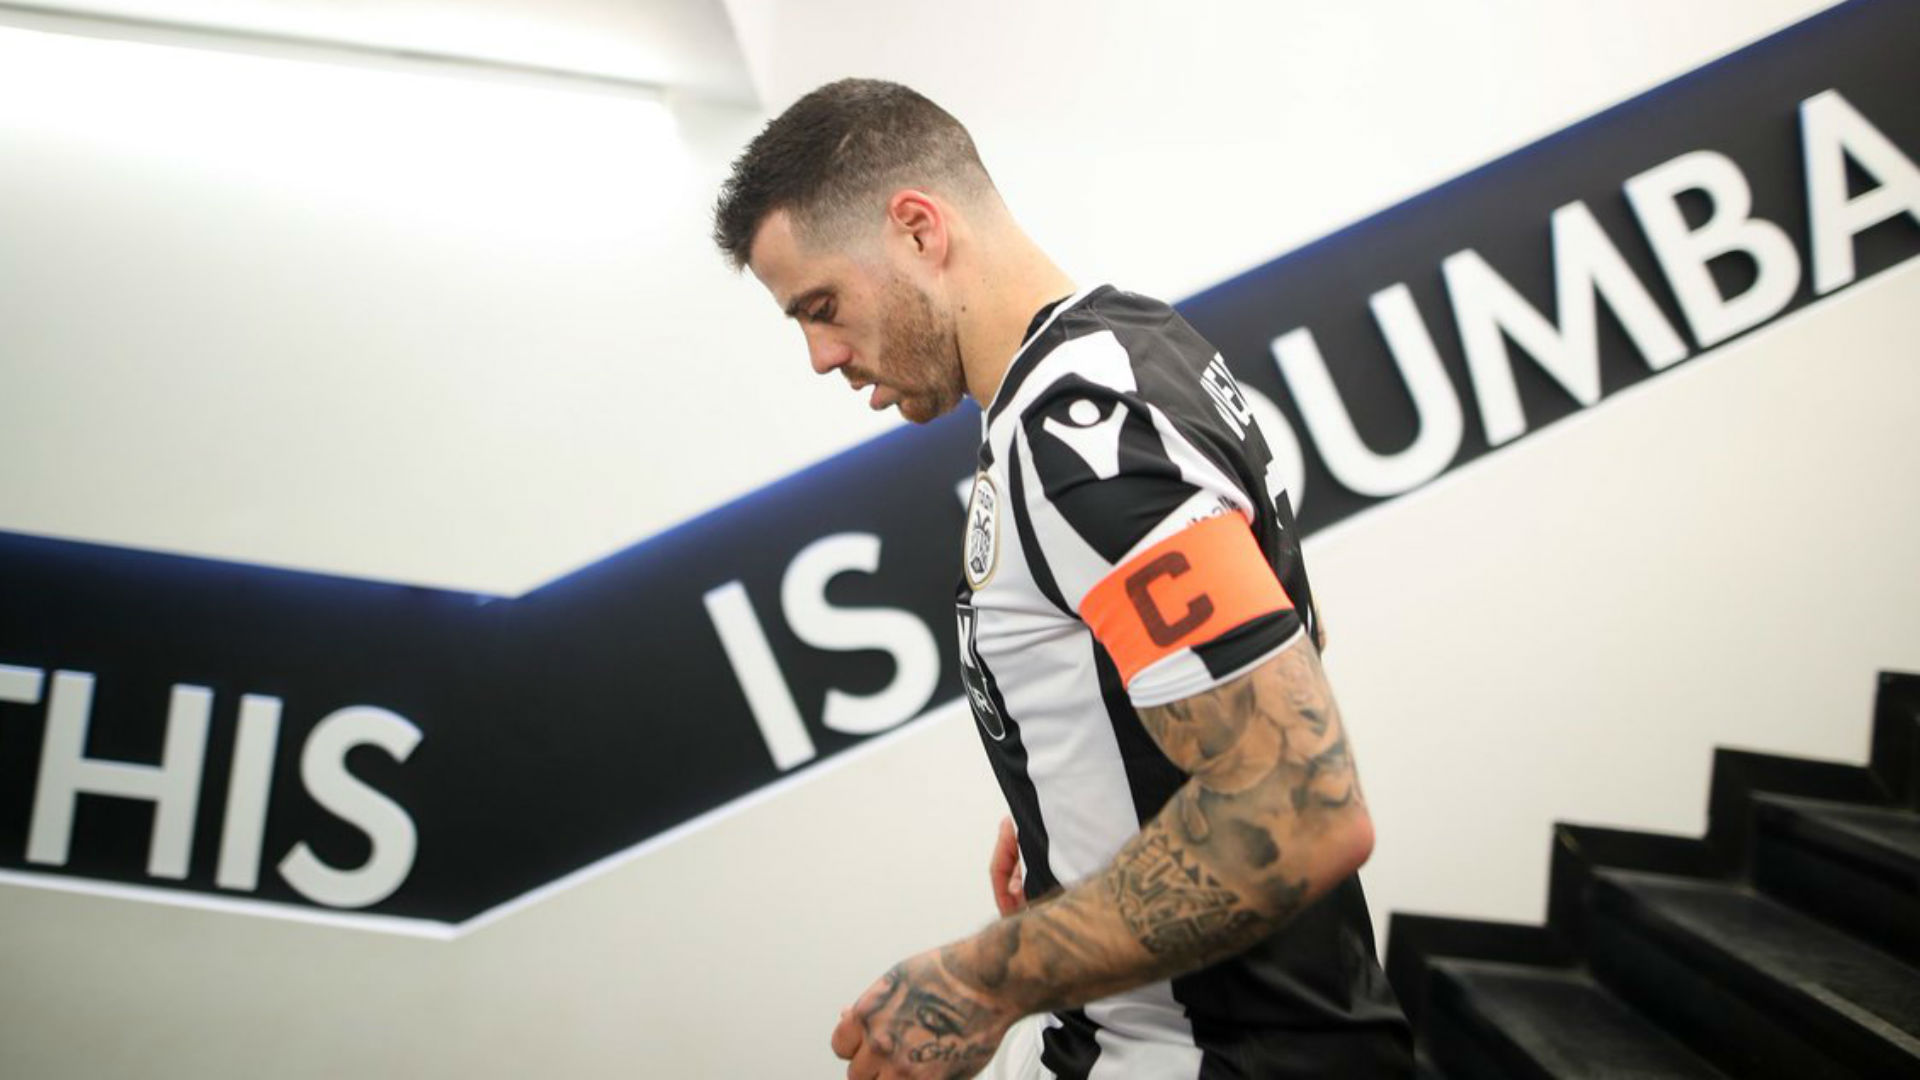 A week on from sustaining a serious knee injury, Vieirinha came on as a late substitute to celebrate PAOK's title win after a 34-year wait.